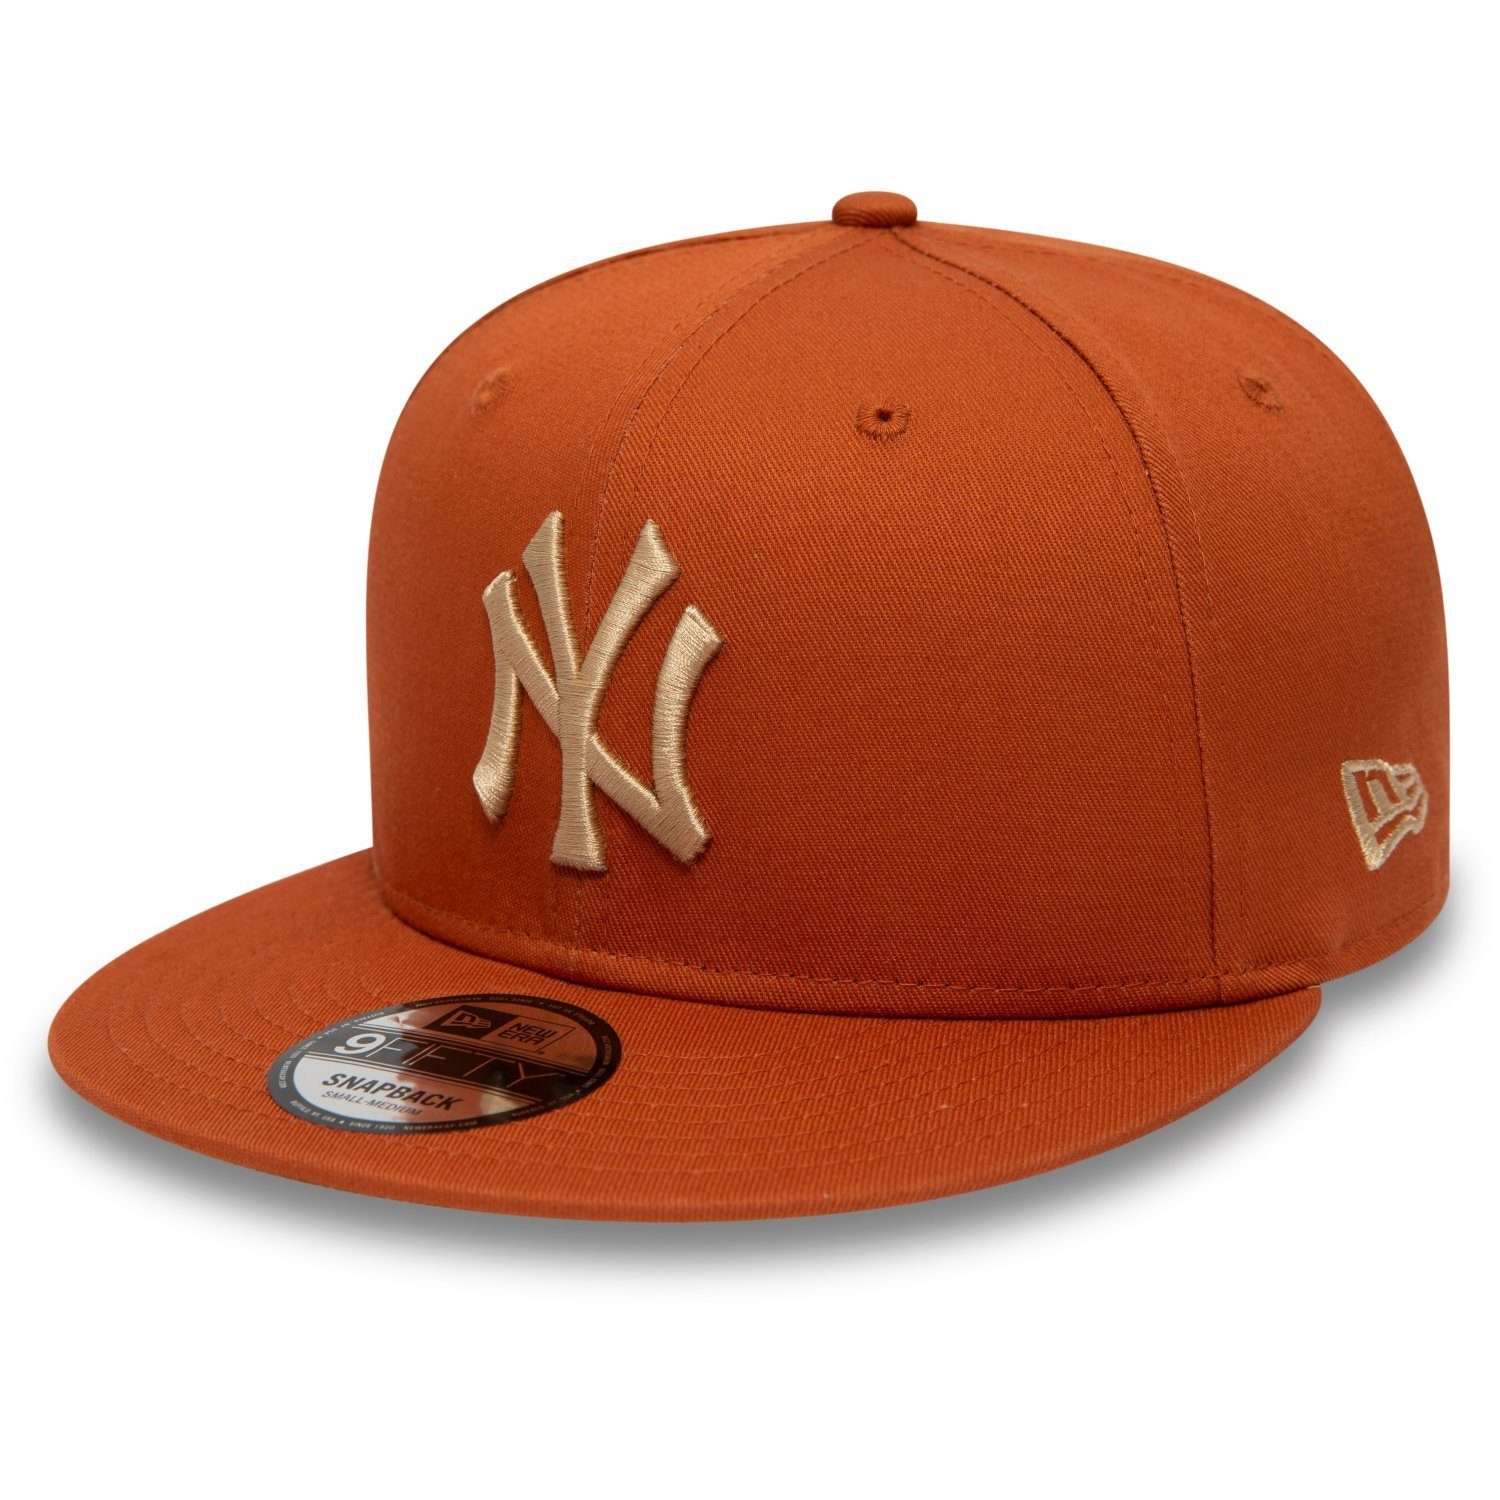 New Cap New York Yankees rost PATCH SIDE Snapback Era 9Fifty